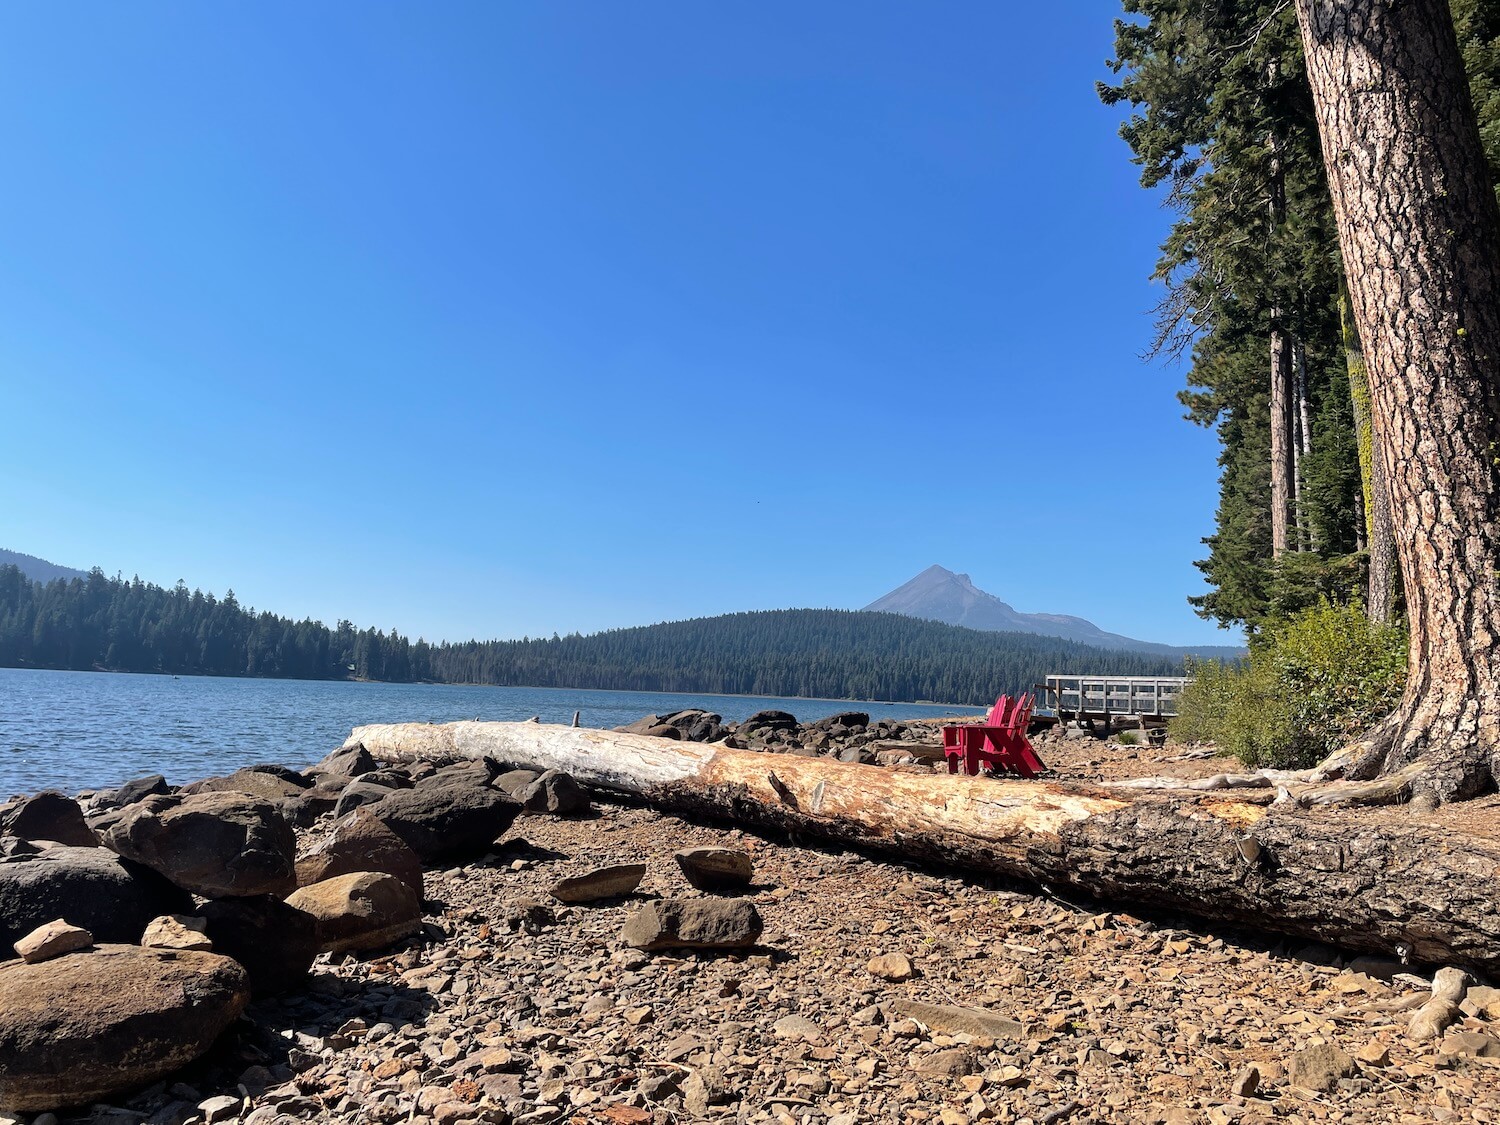 a view of a distant mountain over a lake that is surrounded by pine trees, in the foreground is a rocky beach with logs and two distant red adirondack chairs.